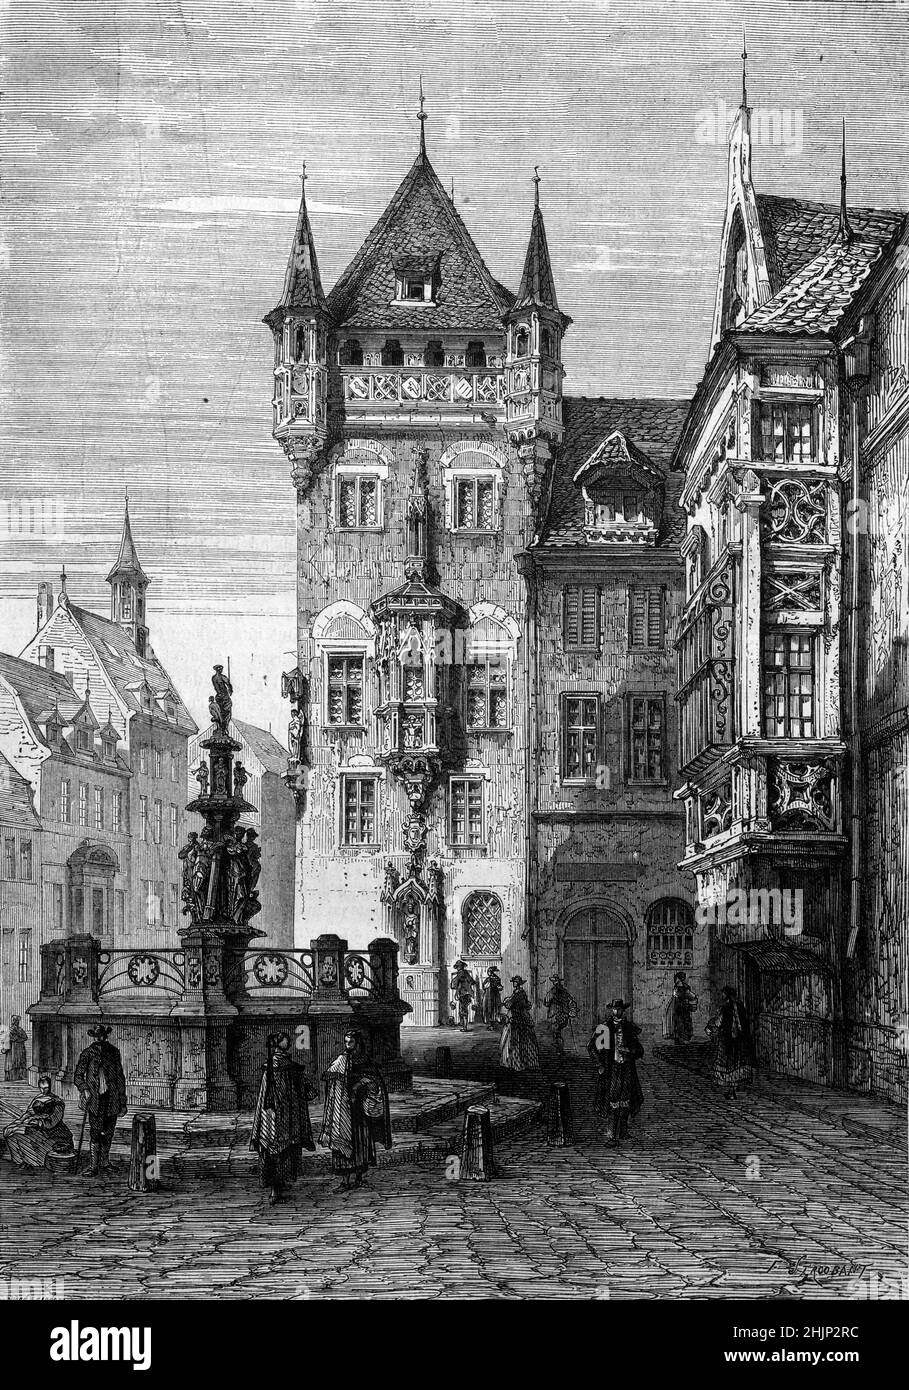 Nassauer Haus, a Medieval Tower House or c13th Residential Tower Built of Castle Sandstone and Street Fountain in the Old Town or Historic District Nuremberg Bavaria Germany. Vintage Illustration or Engraving 1865. Stock Photo